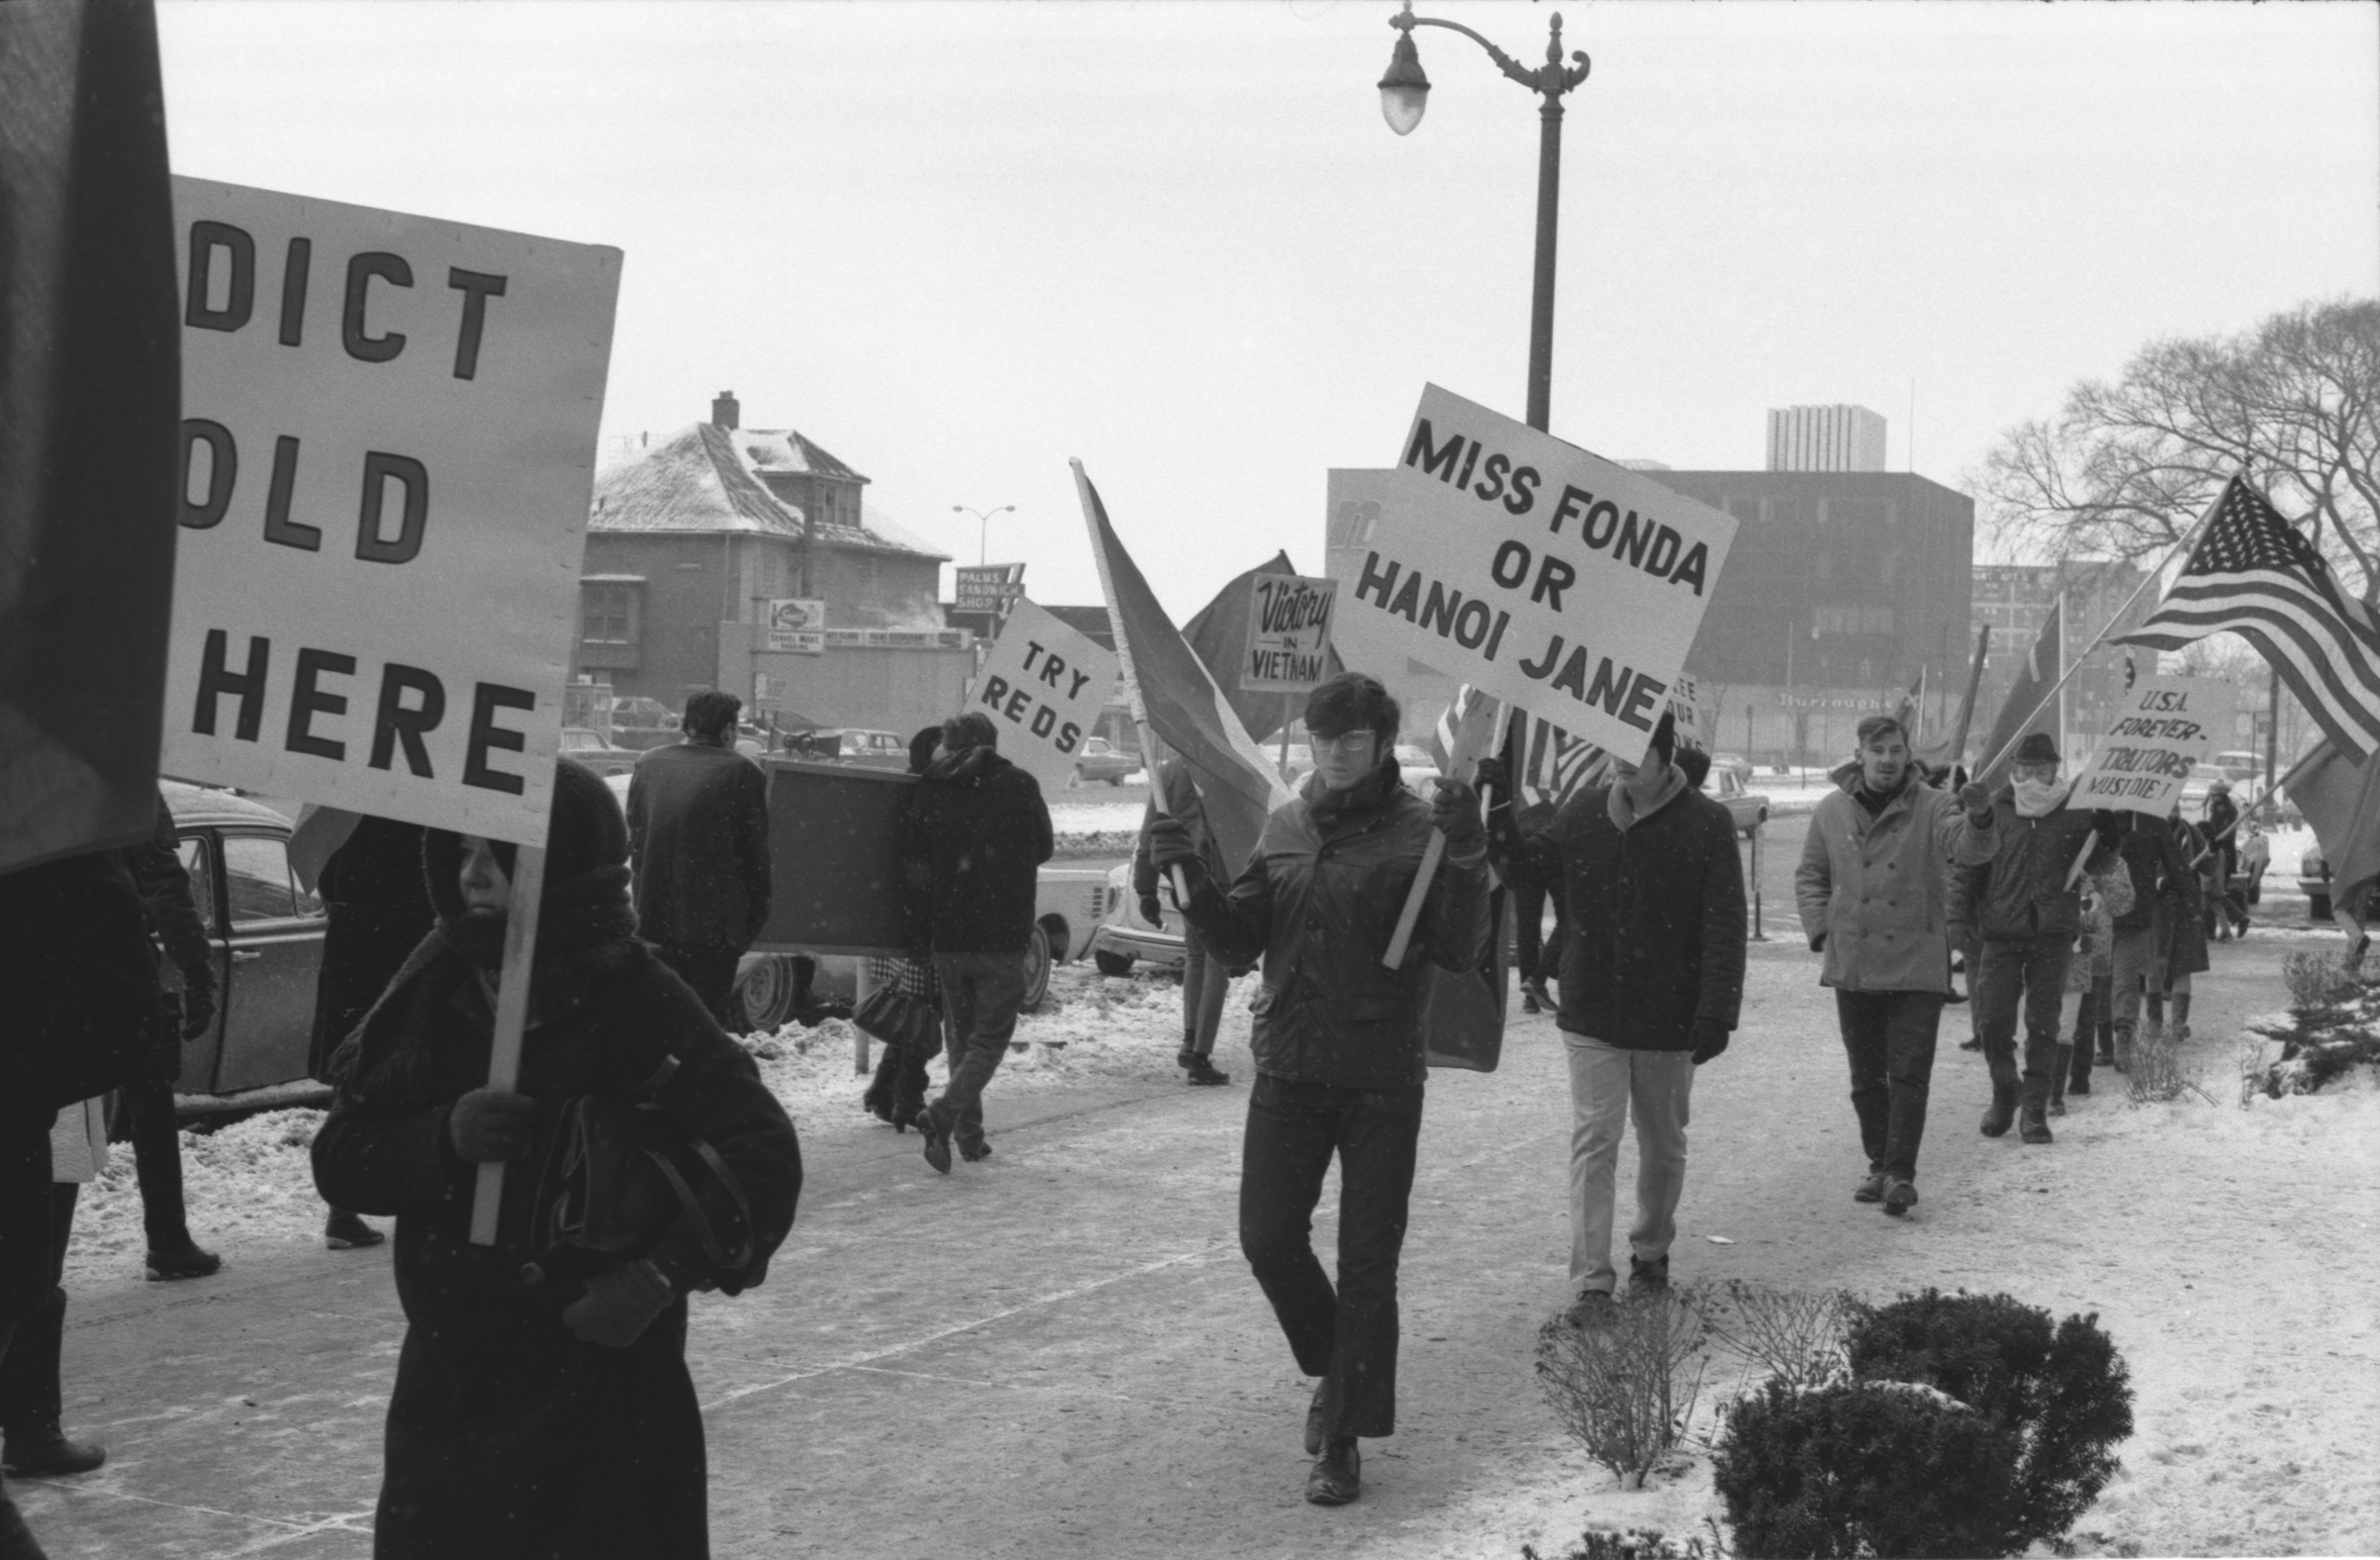 Protesters carrying signs protesting Jane Fonda's visit to Hanoi outside Howard Johnson's Hotel in Detroit during the time of the 